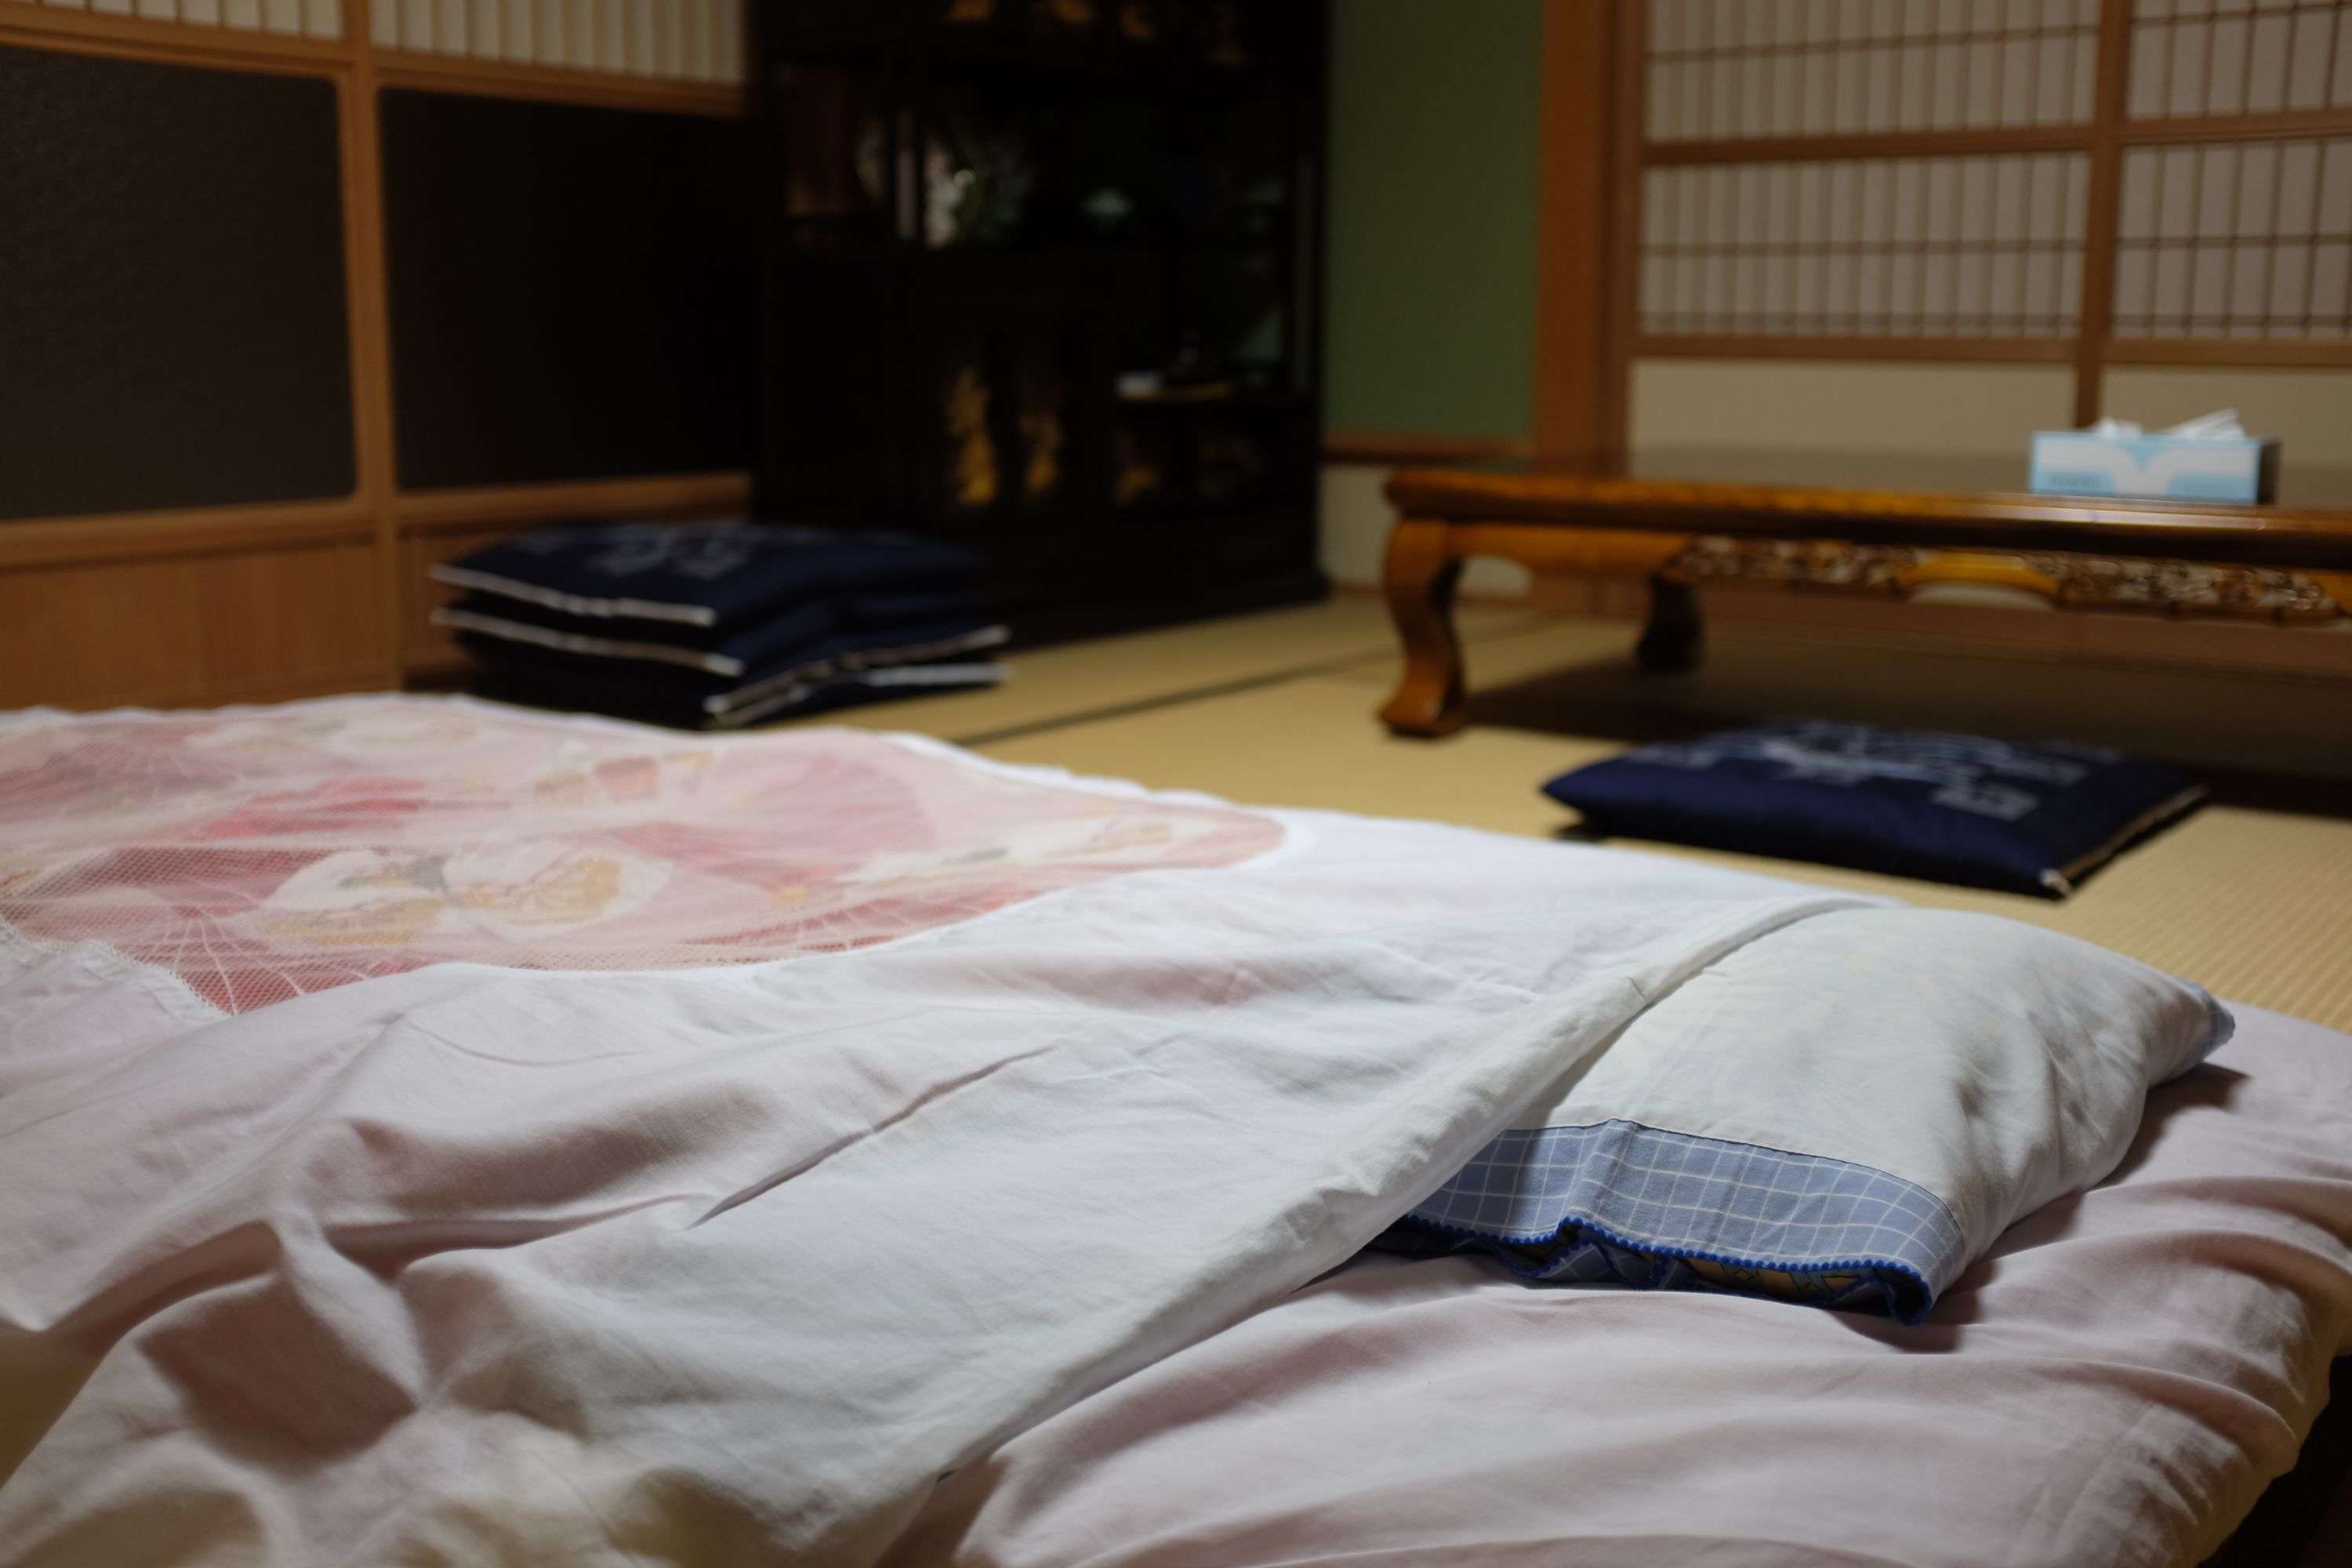 A Japanese futon bed laid out on the floor of a traditional Japanese room.